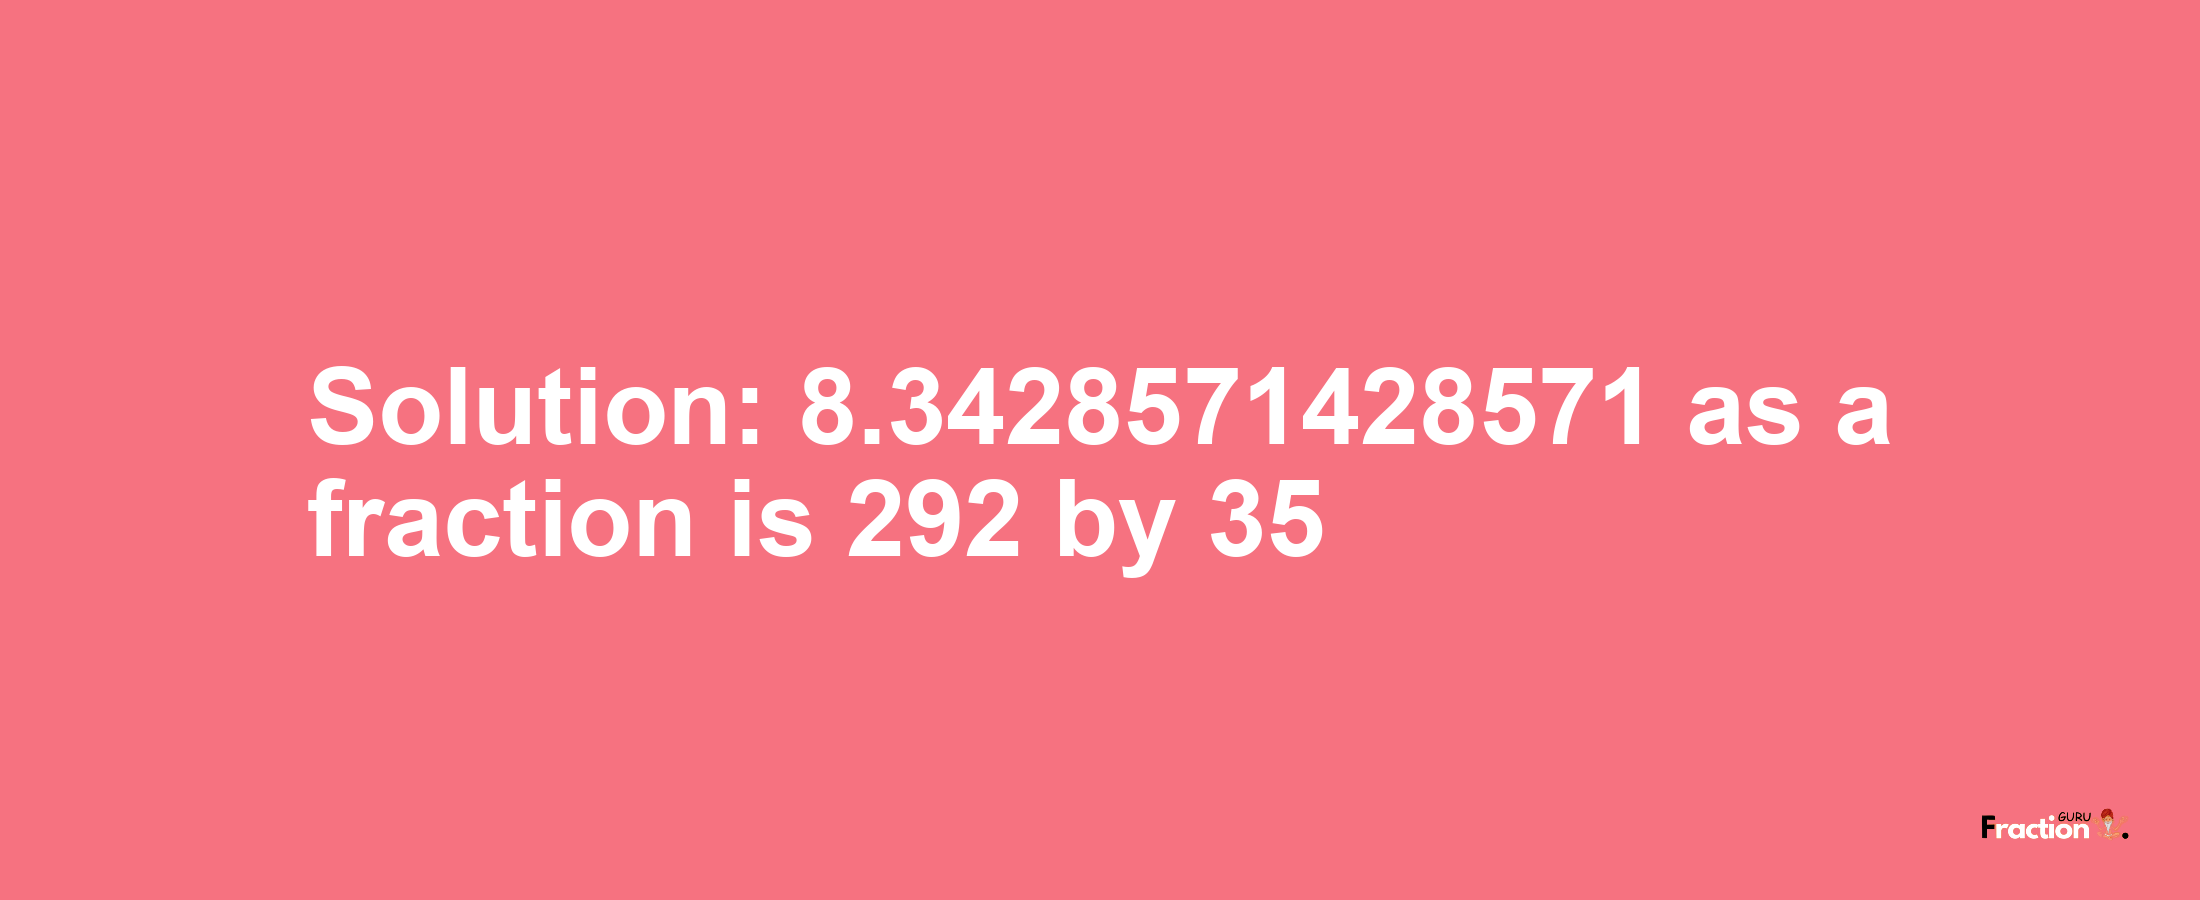 Solution:8.3428571428571 as a fraction is 292/35